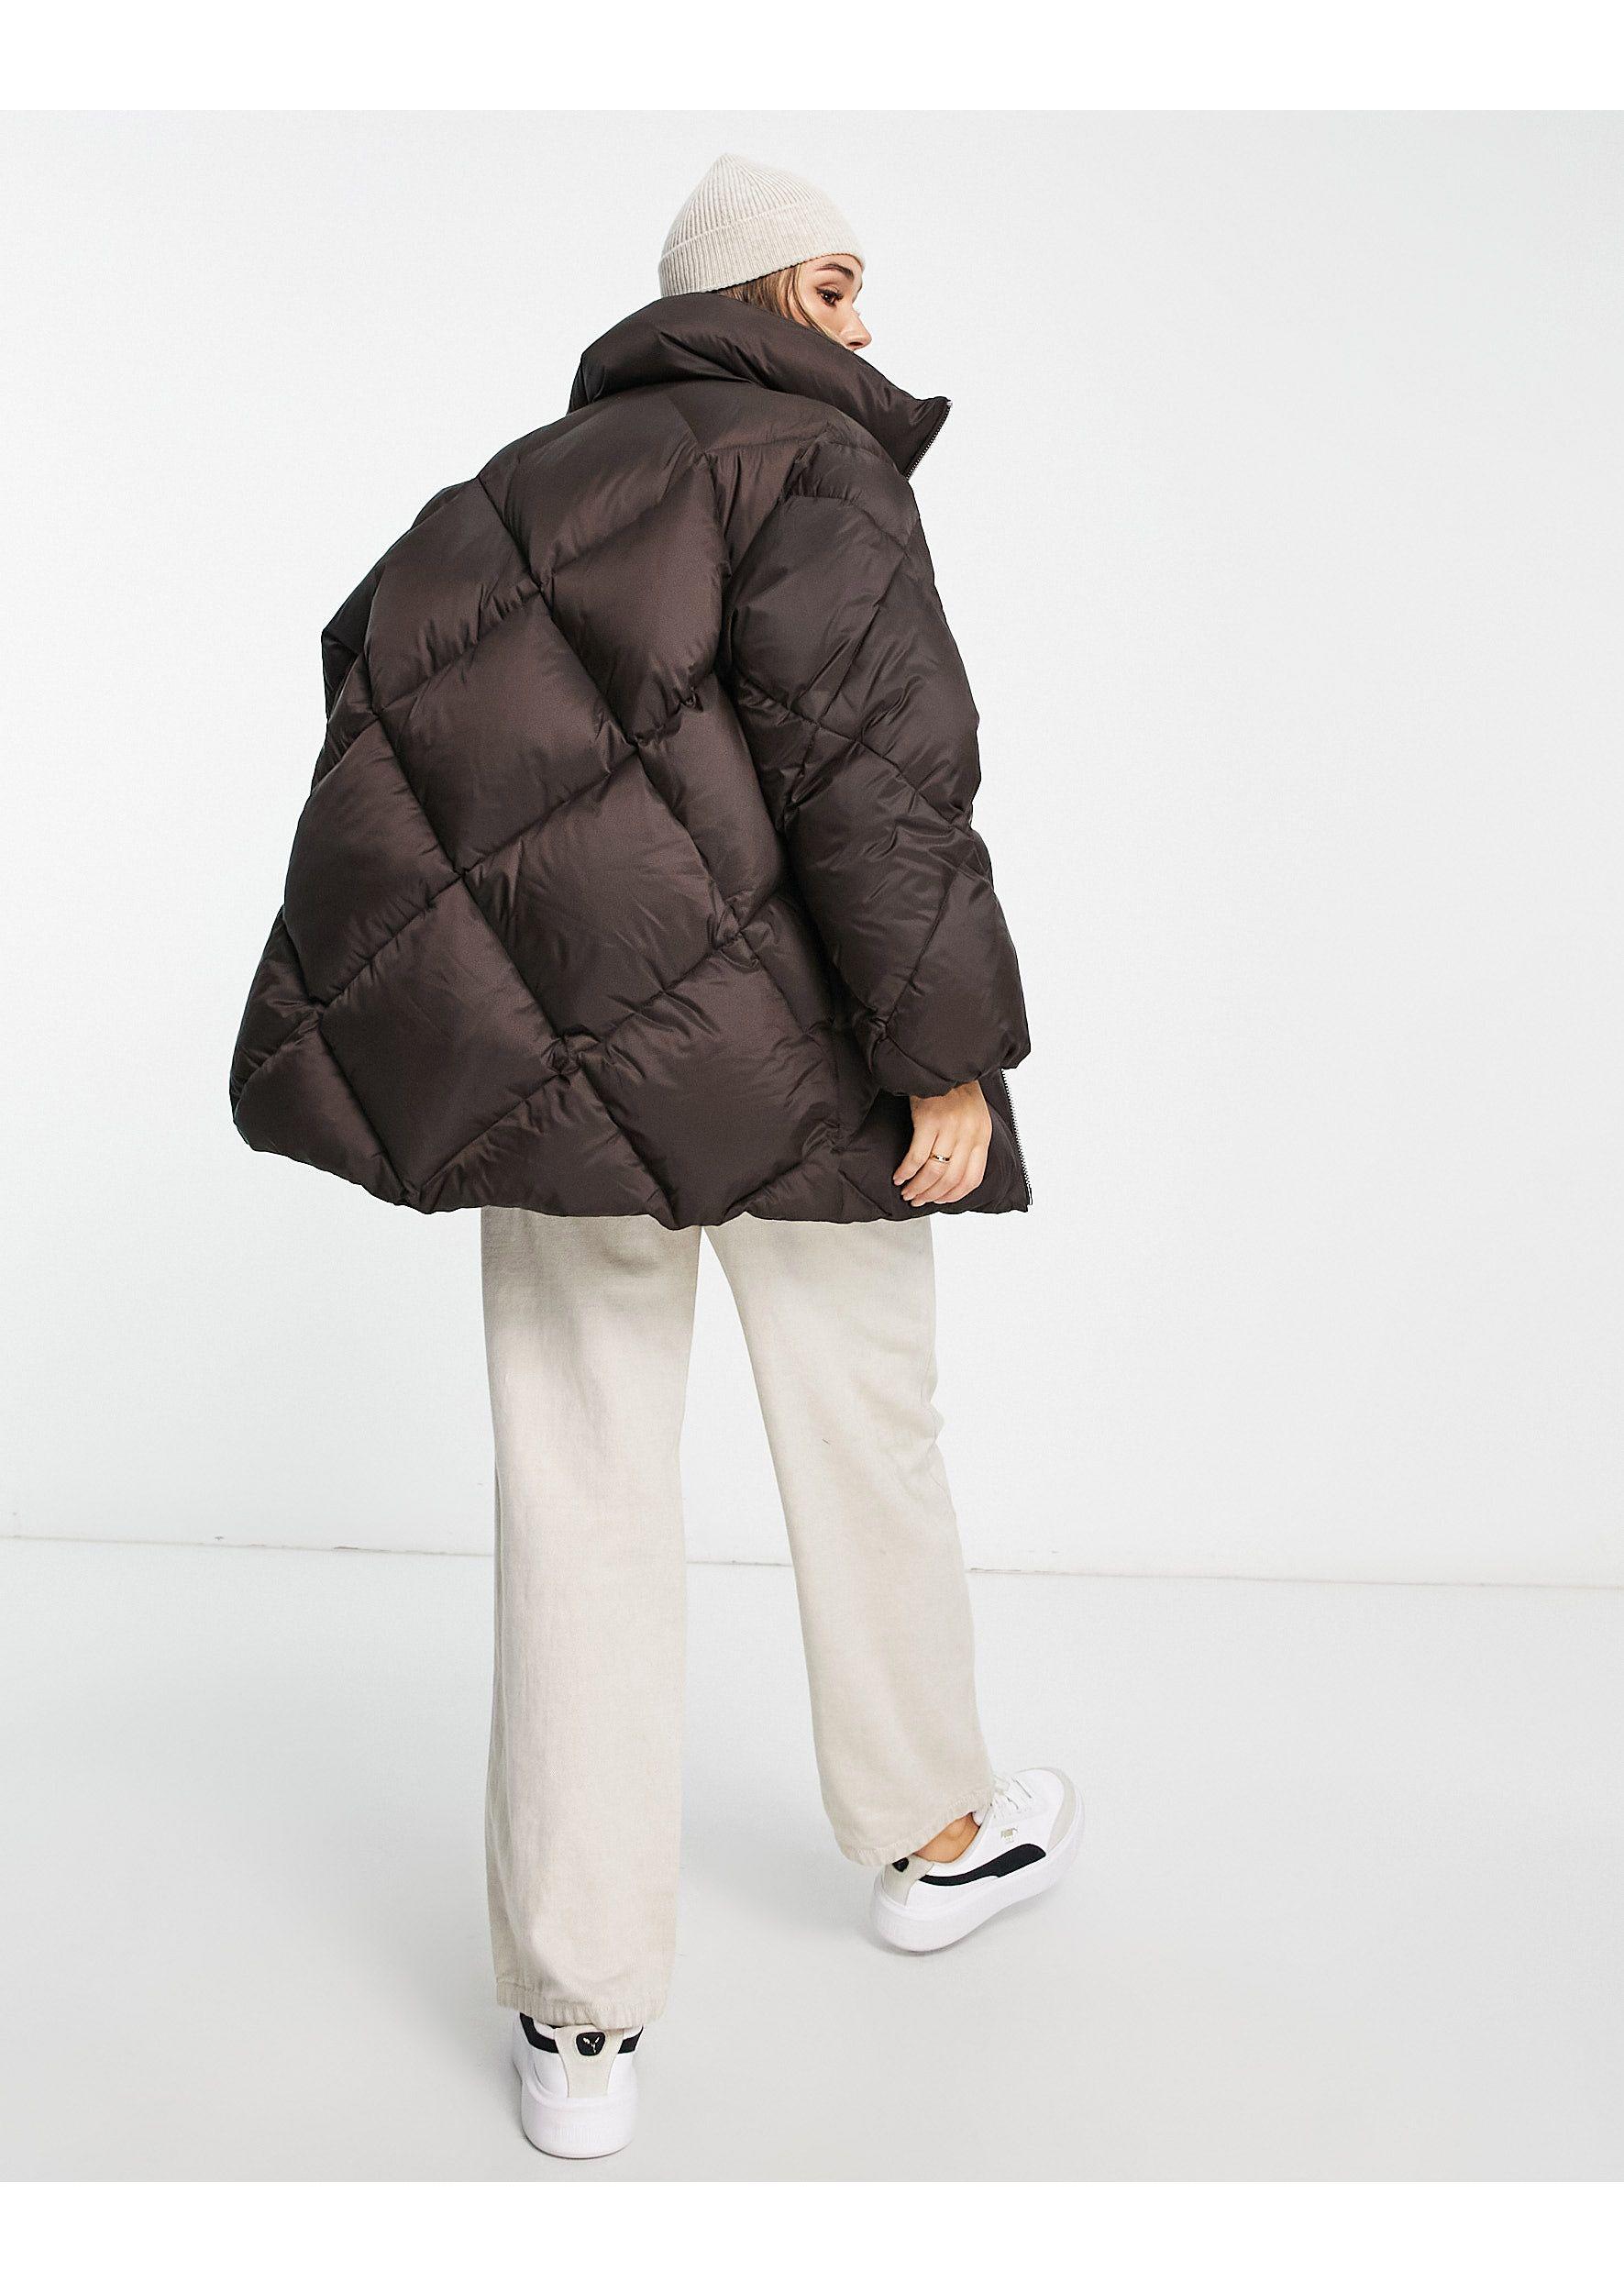 & Other Stories Padded Down Jacket With Hood in Brown | Lyst